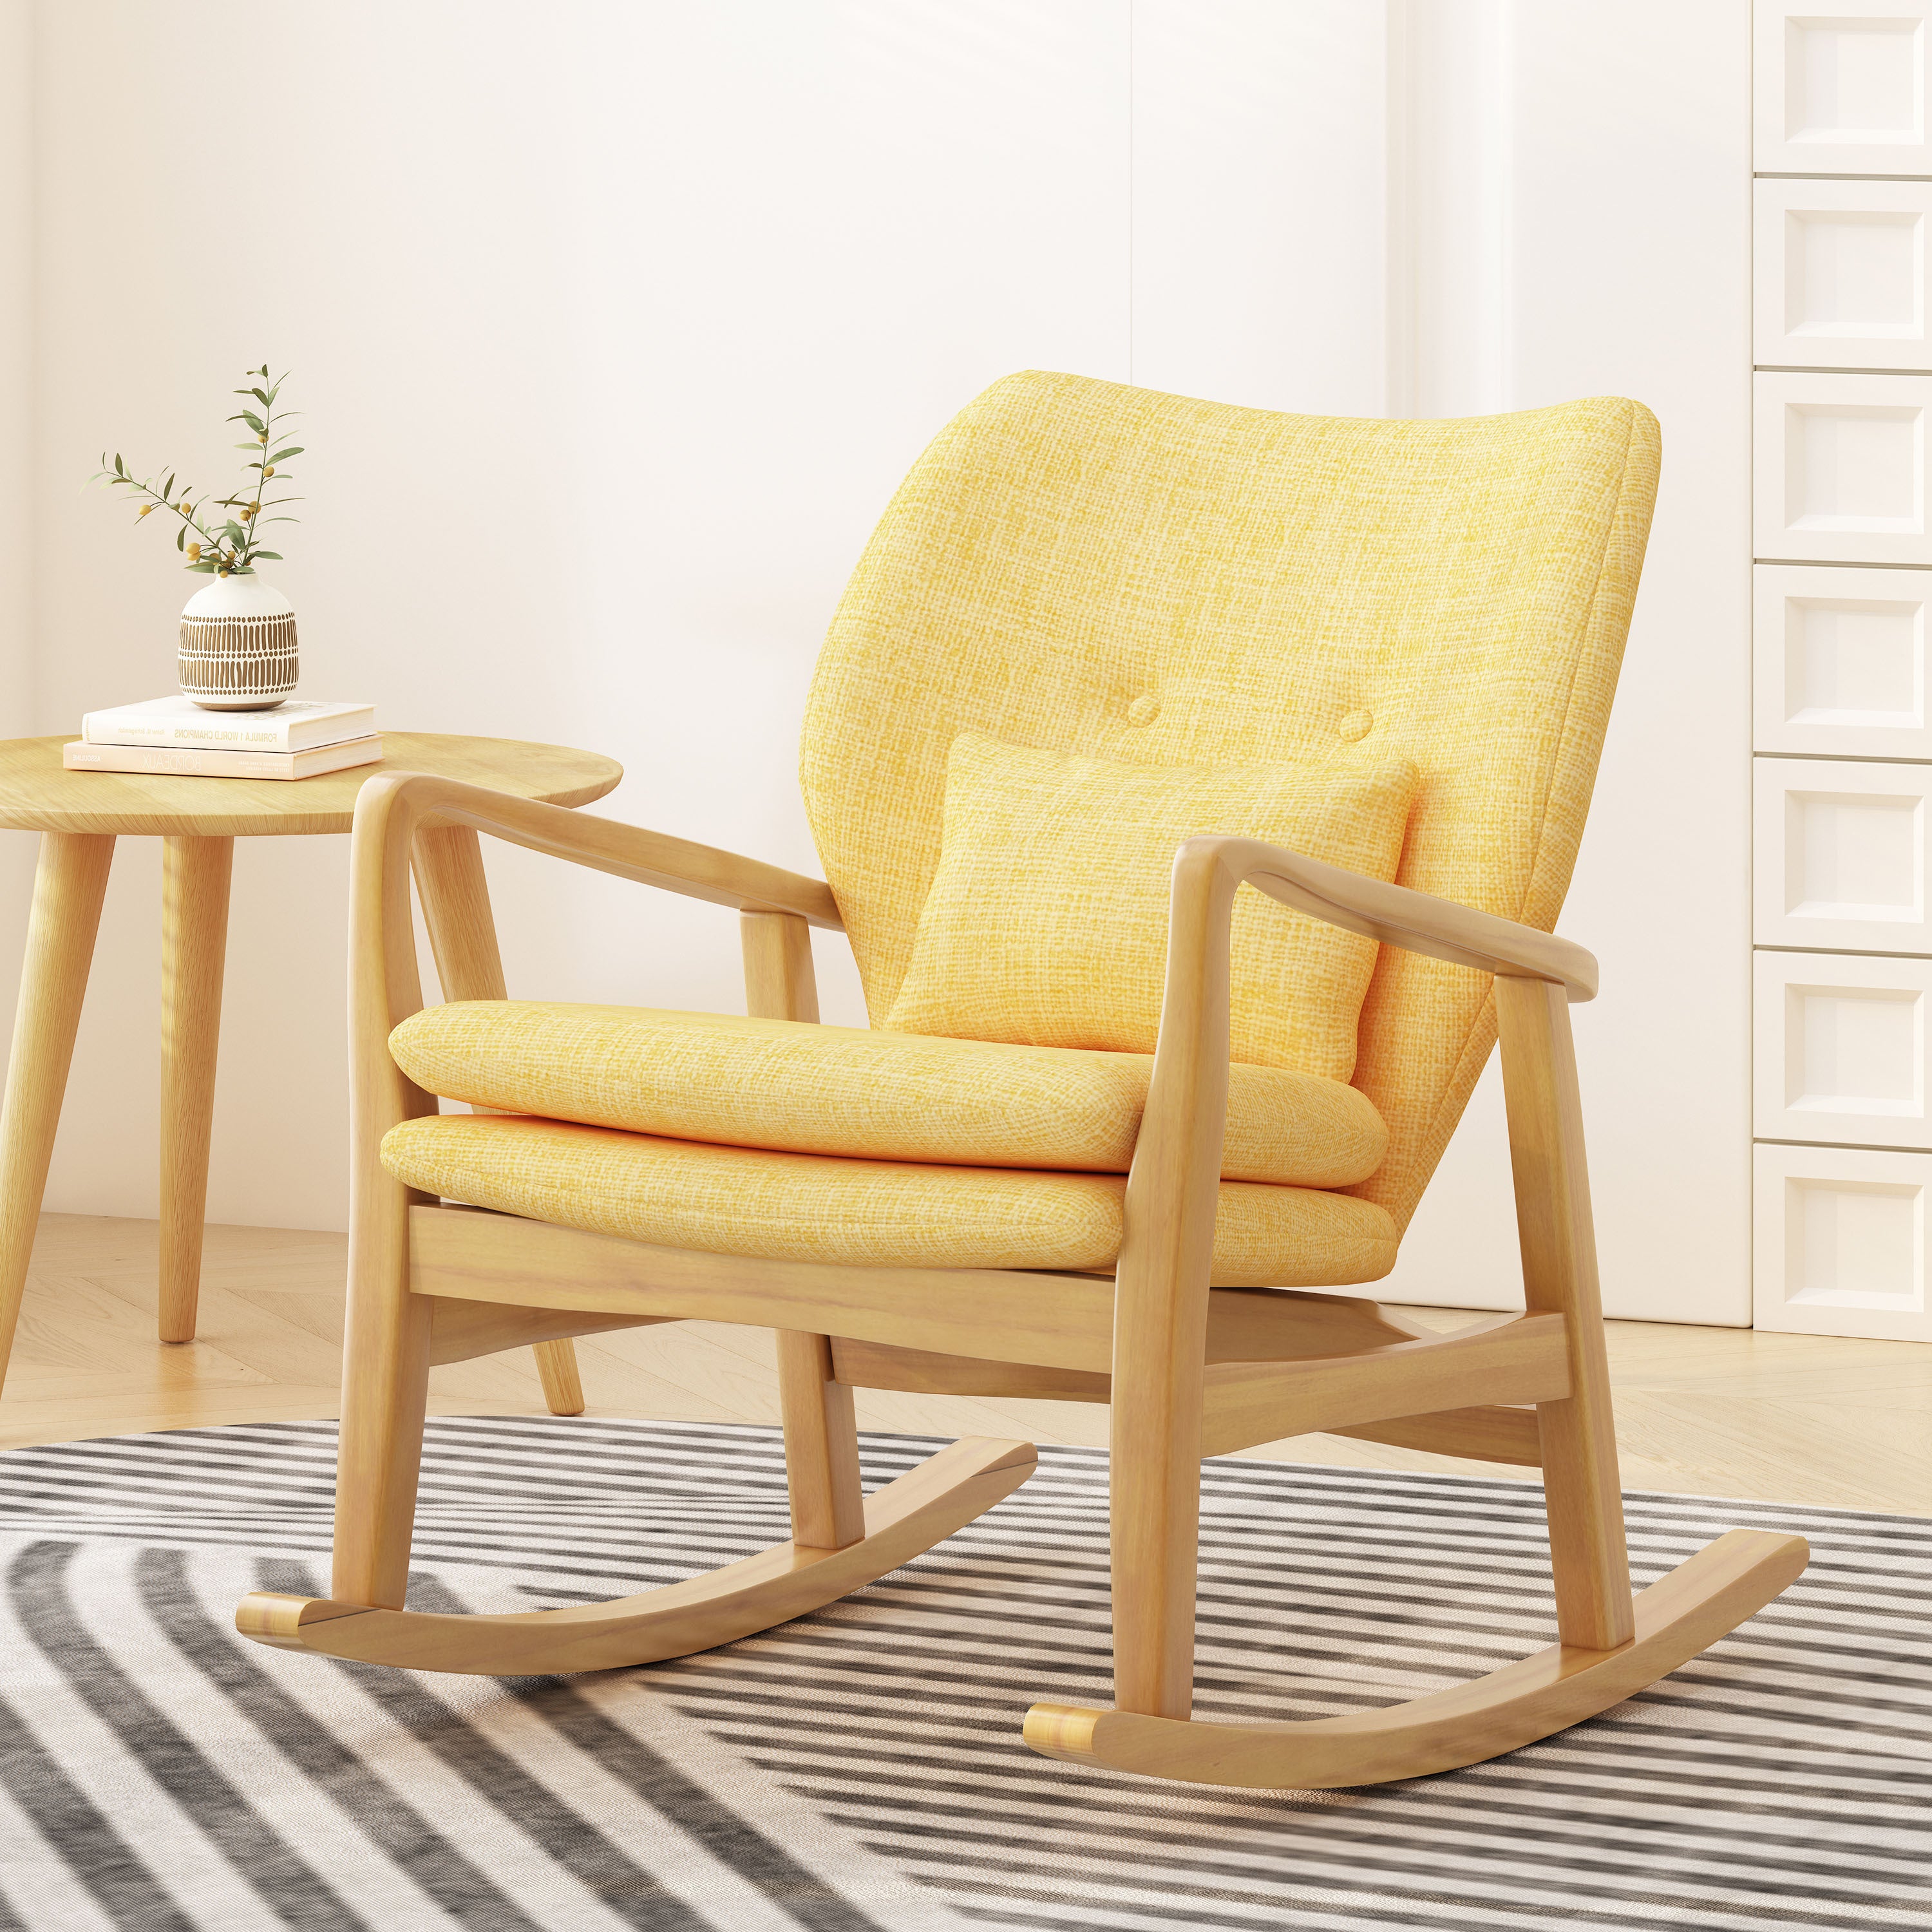 Tm-Home-Solid-Wood-Rocking-Chair-with-Yellow-Linen-Cushion-Chairs-&-Seating